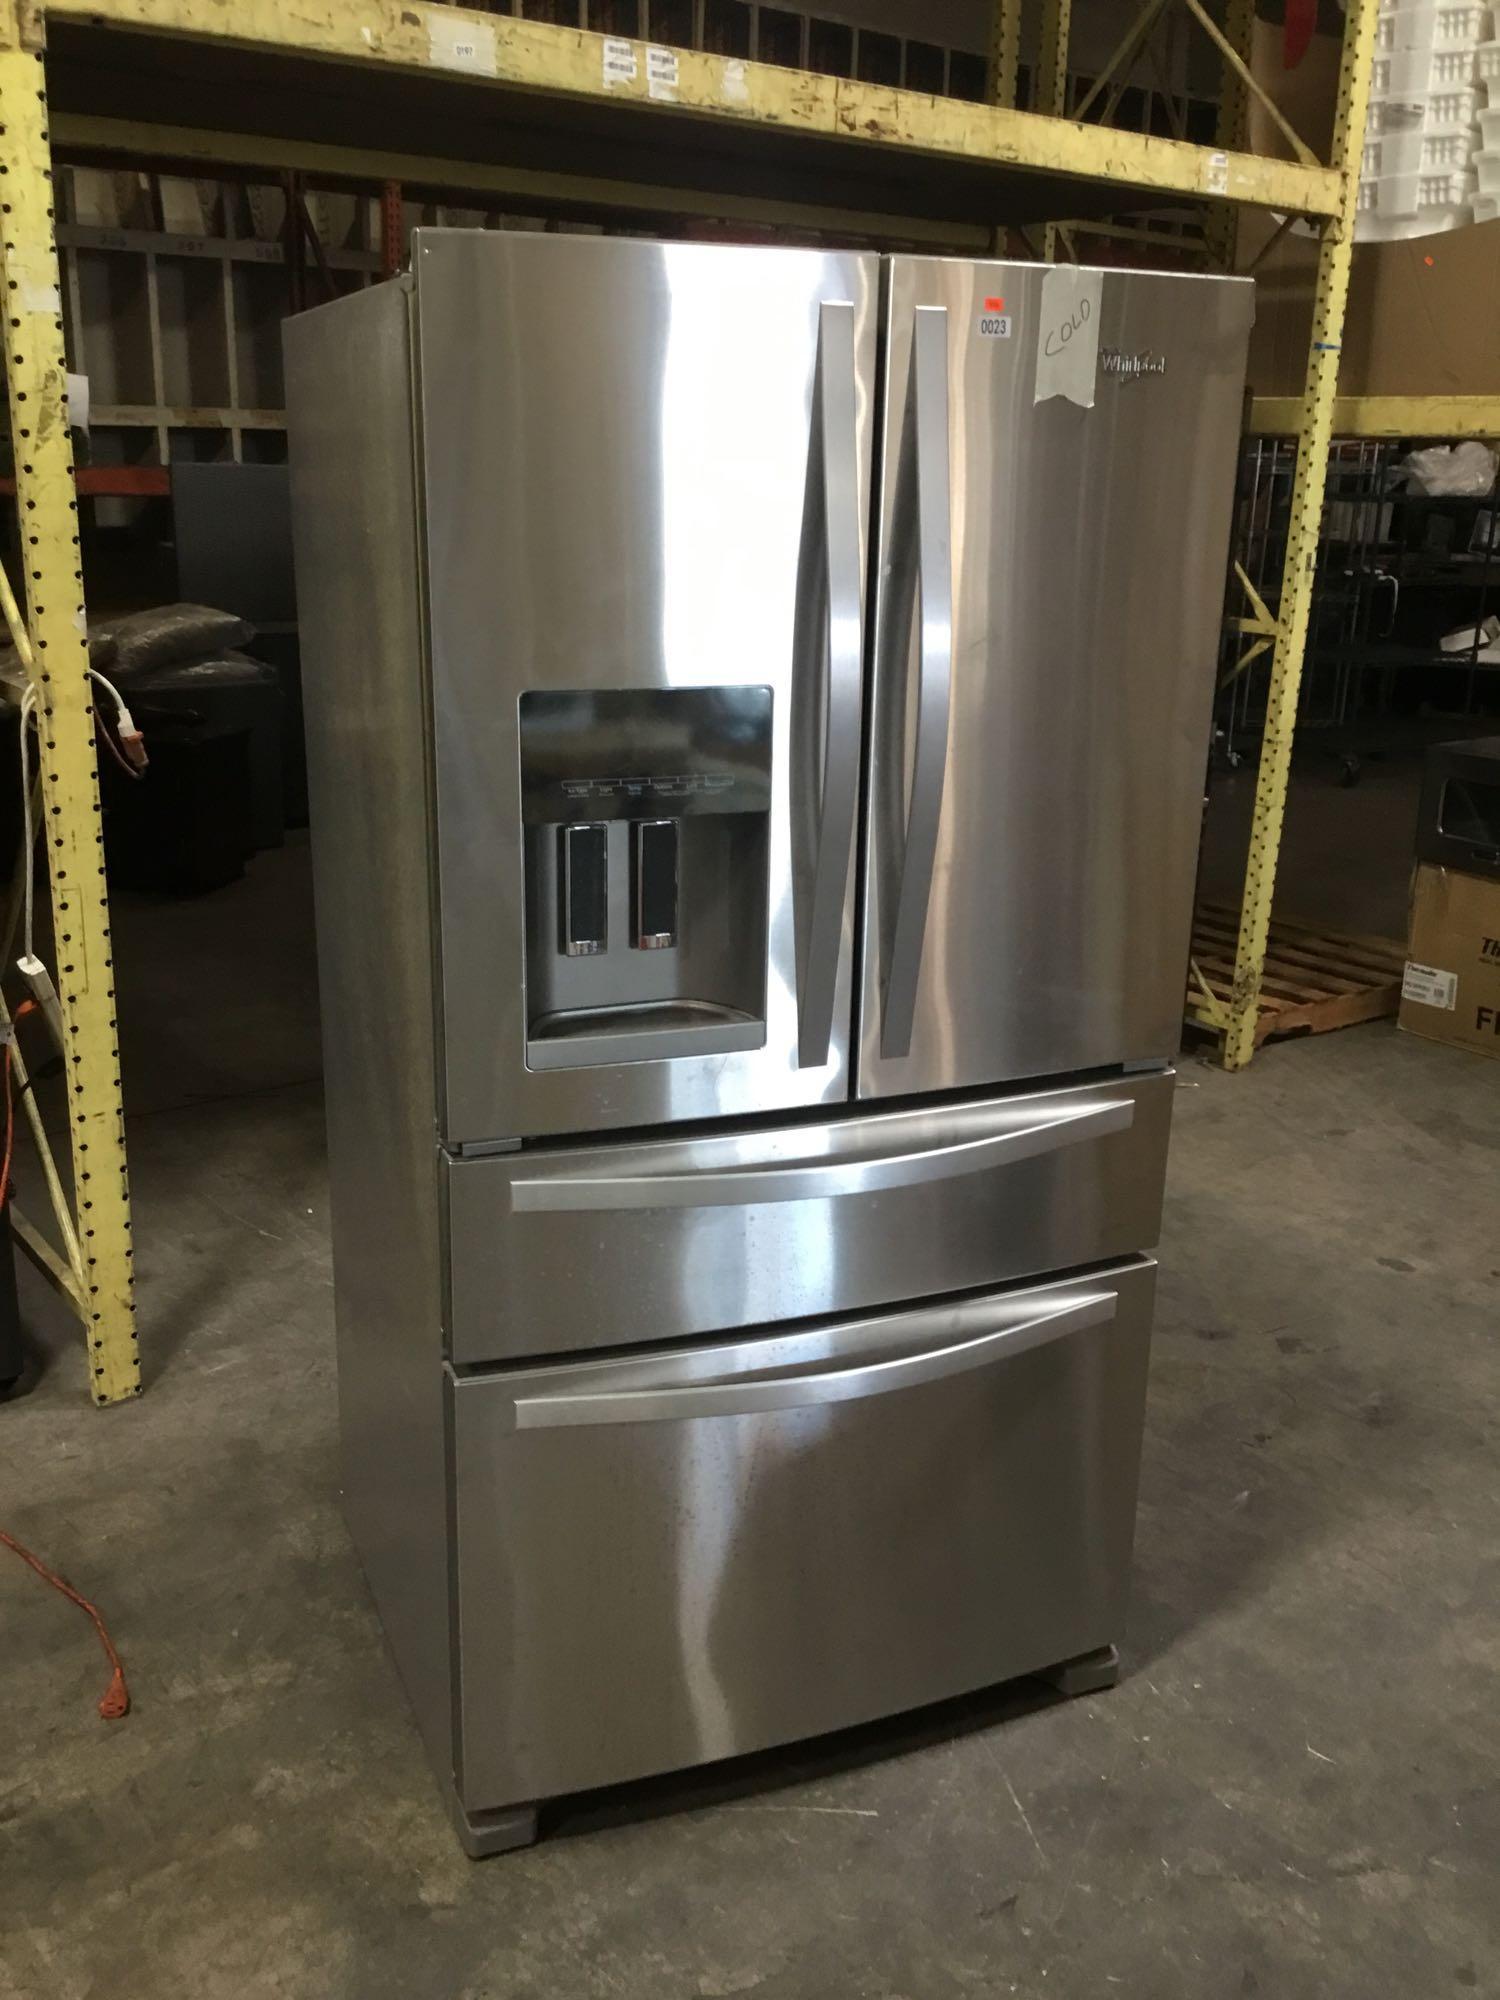 Whirlpool Stainless Steel 25.0 cu. ft. French Door Refrigerator w/ Refrigerated Drawer